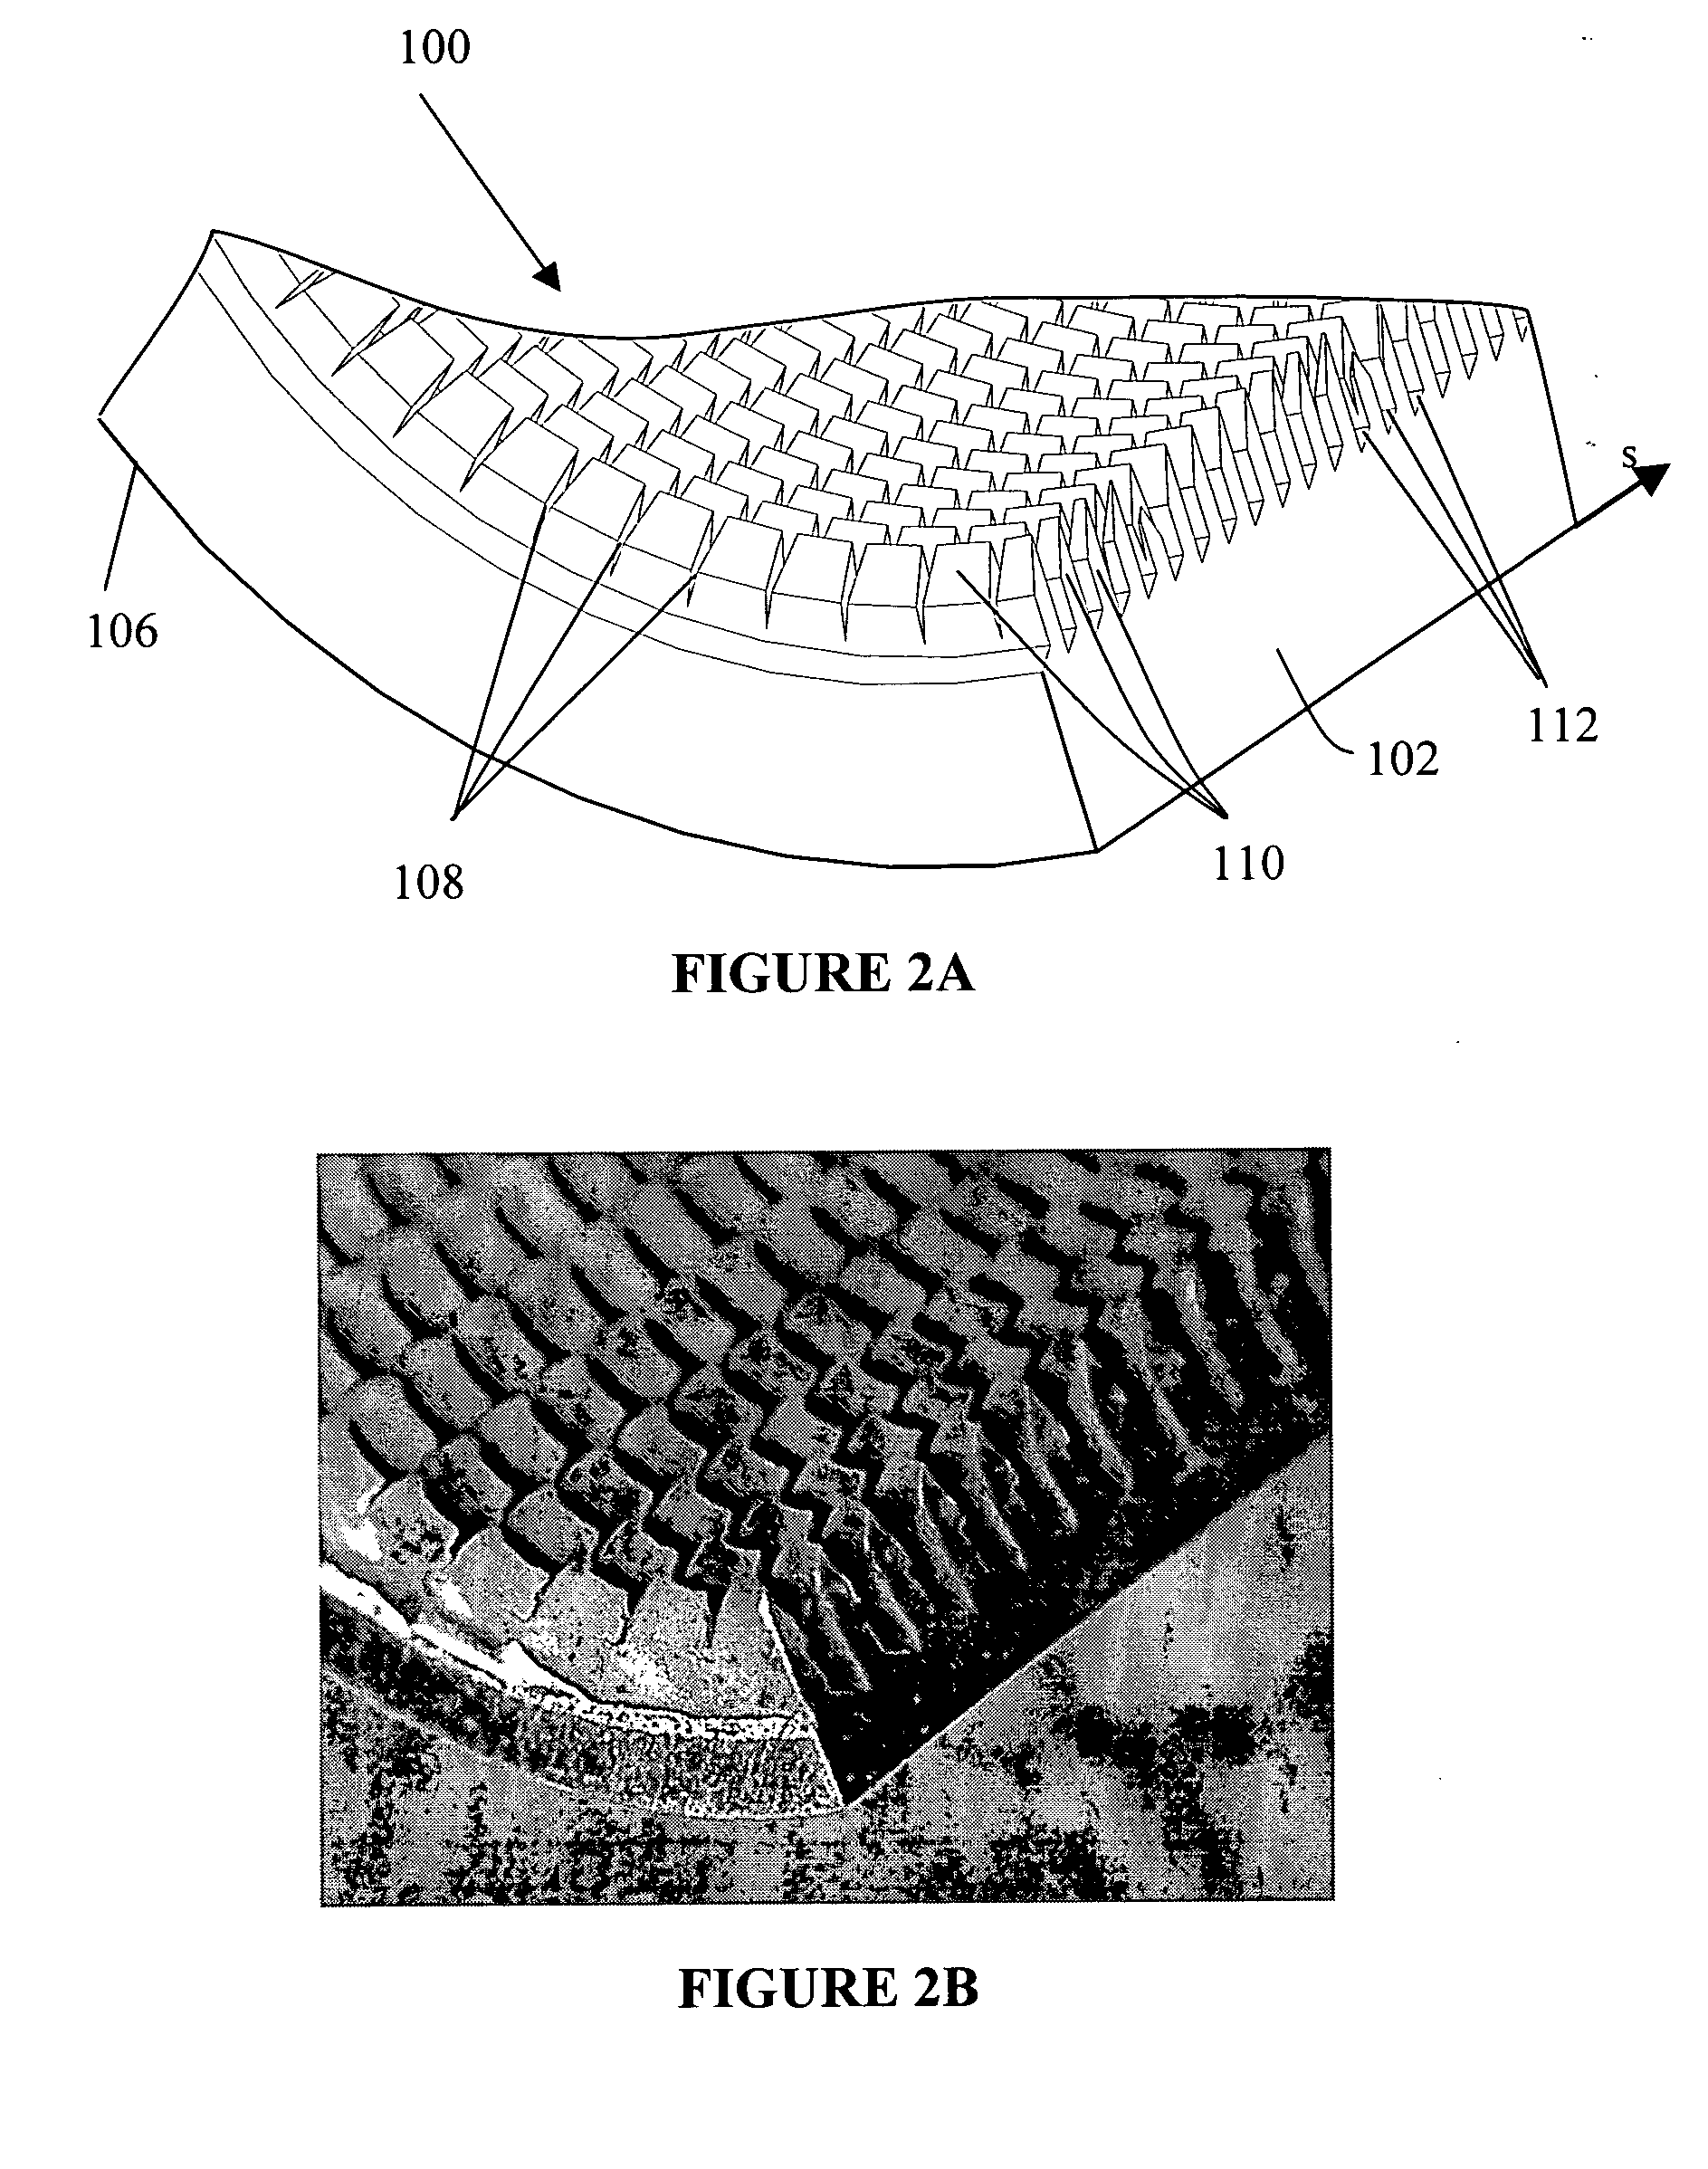 Method and tool for making enhanced heat transfer surfaces